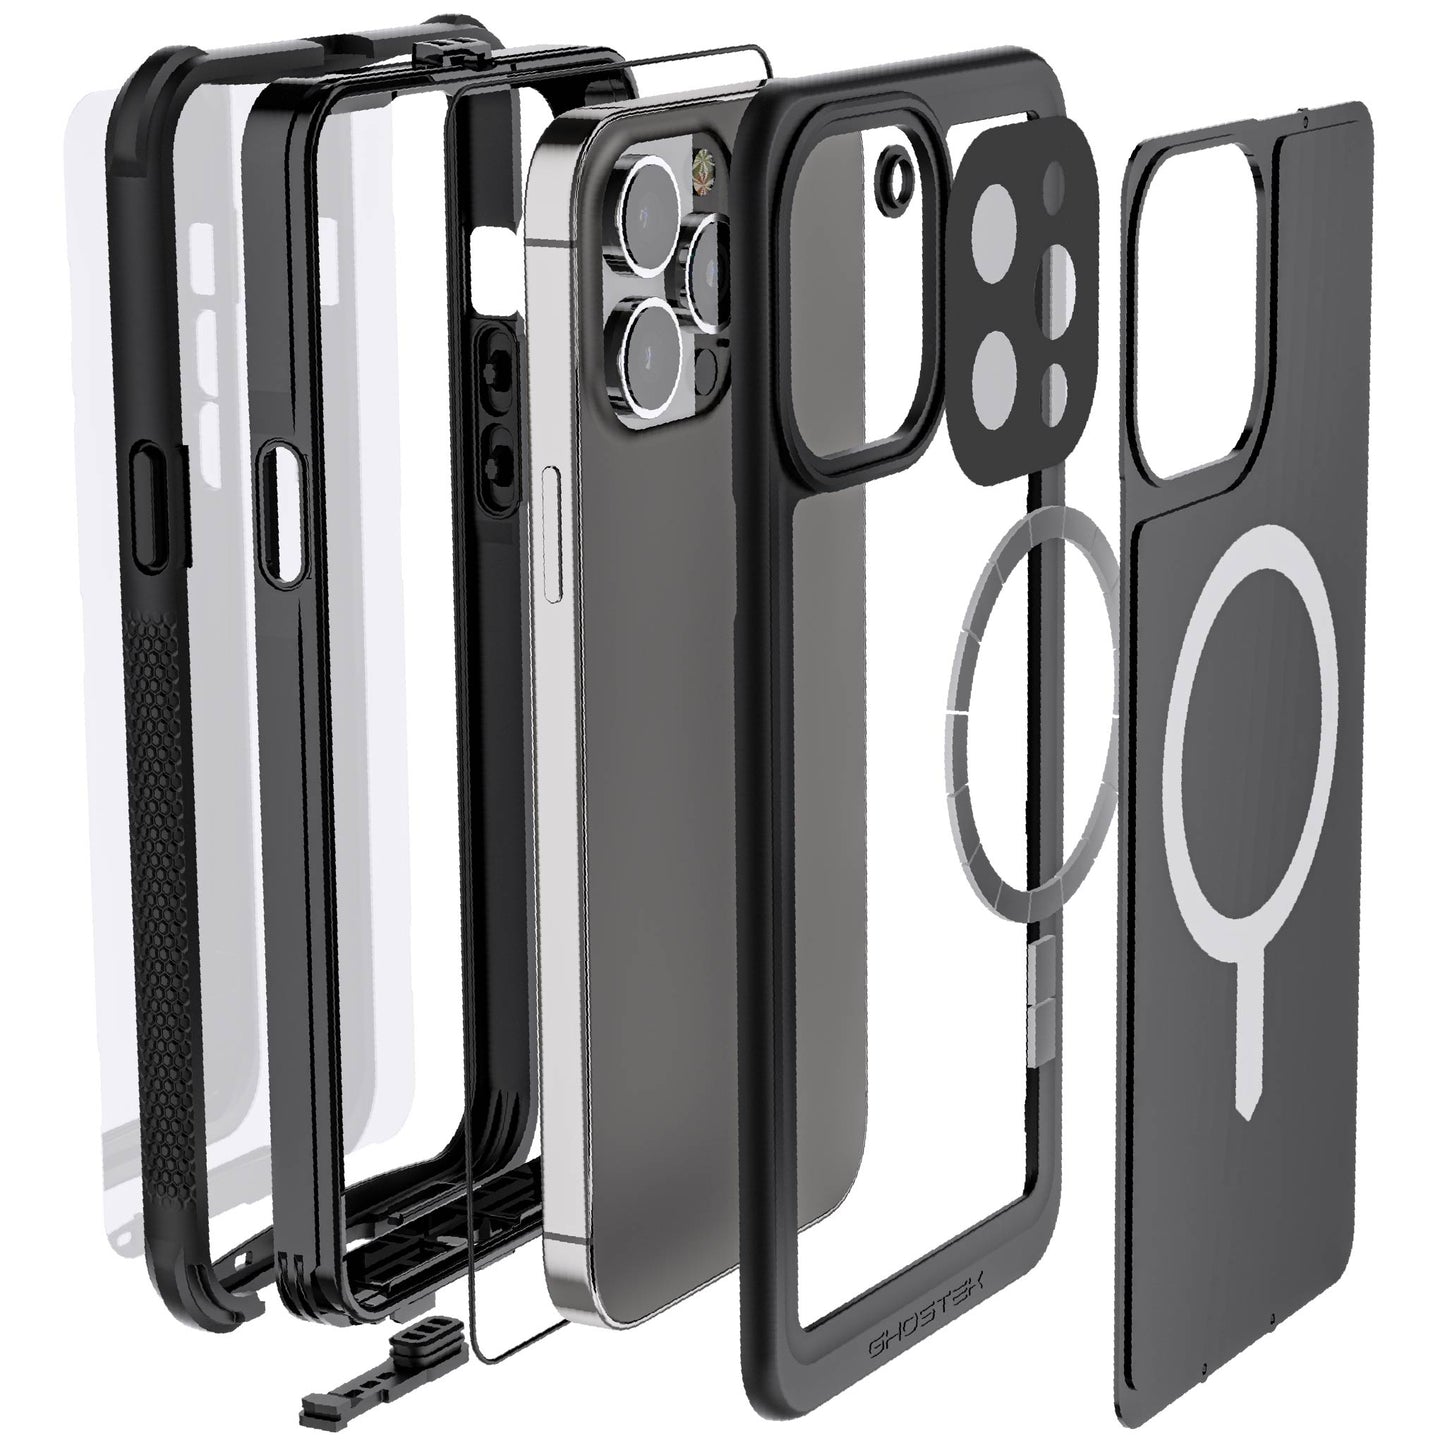 Ghostek Nautical 4 Case for iPhone 13, Pro, Pro Max | Military Grade 360°